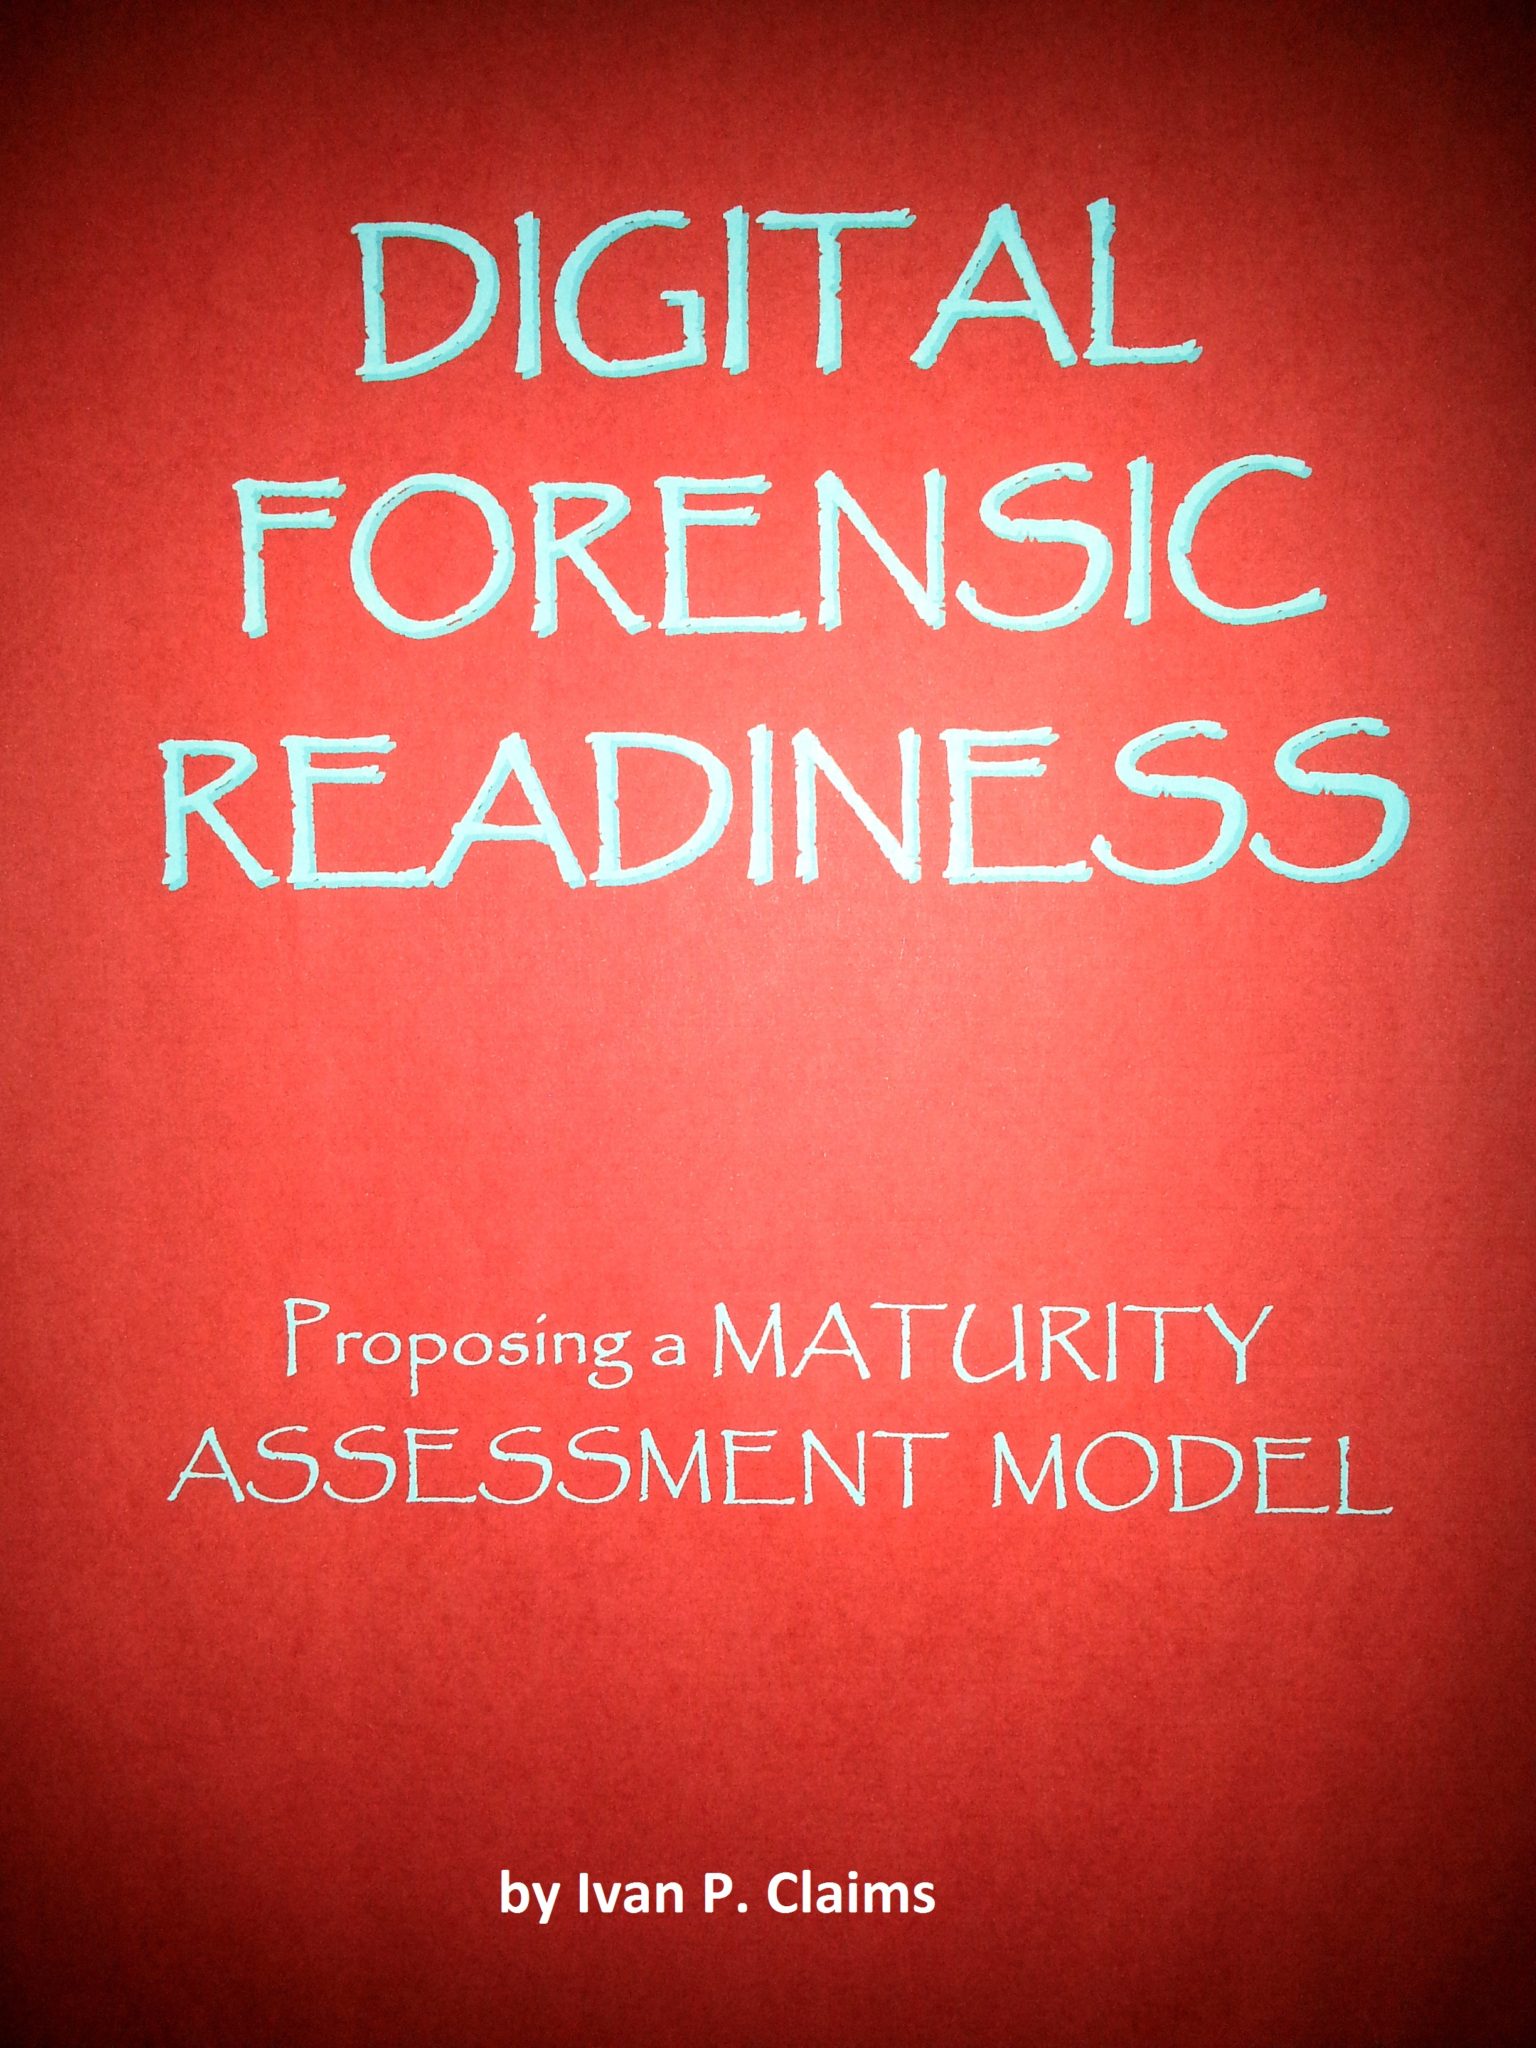 FREE: Digital Forensic Readiness: Proposing a Maturity Assessment Model by Ivan P. Claims